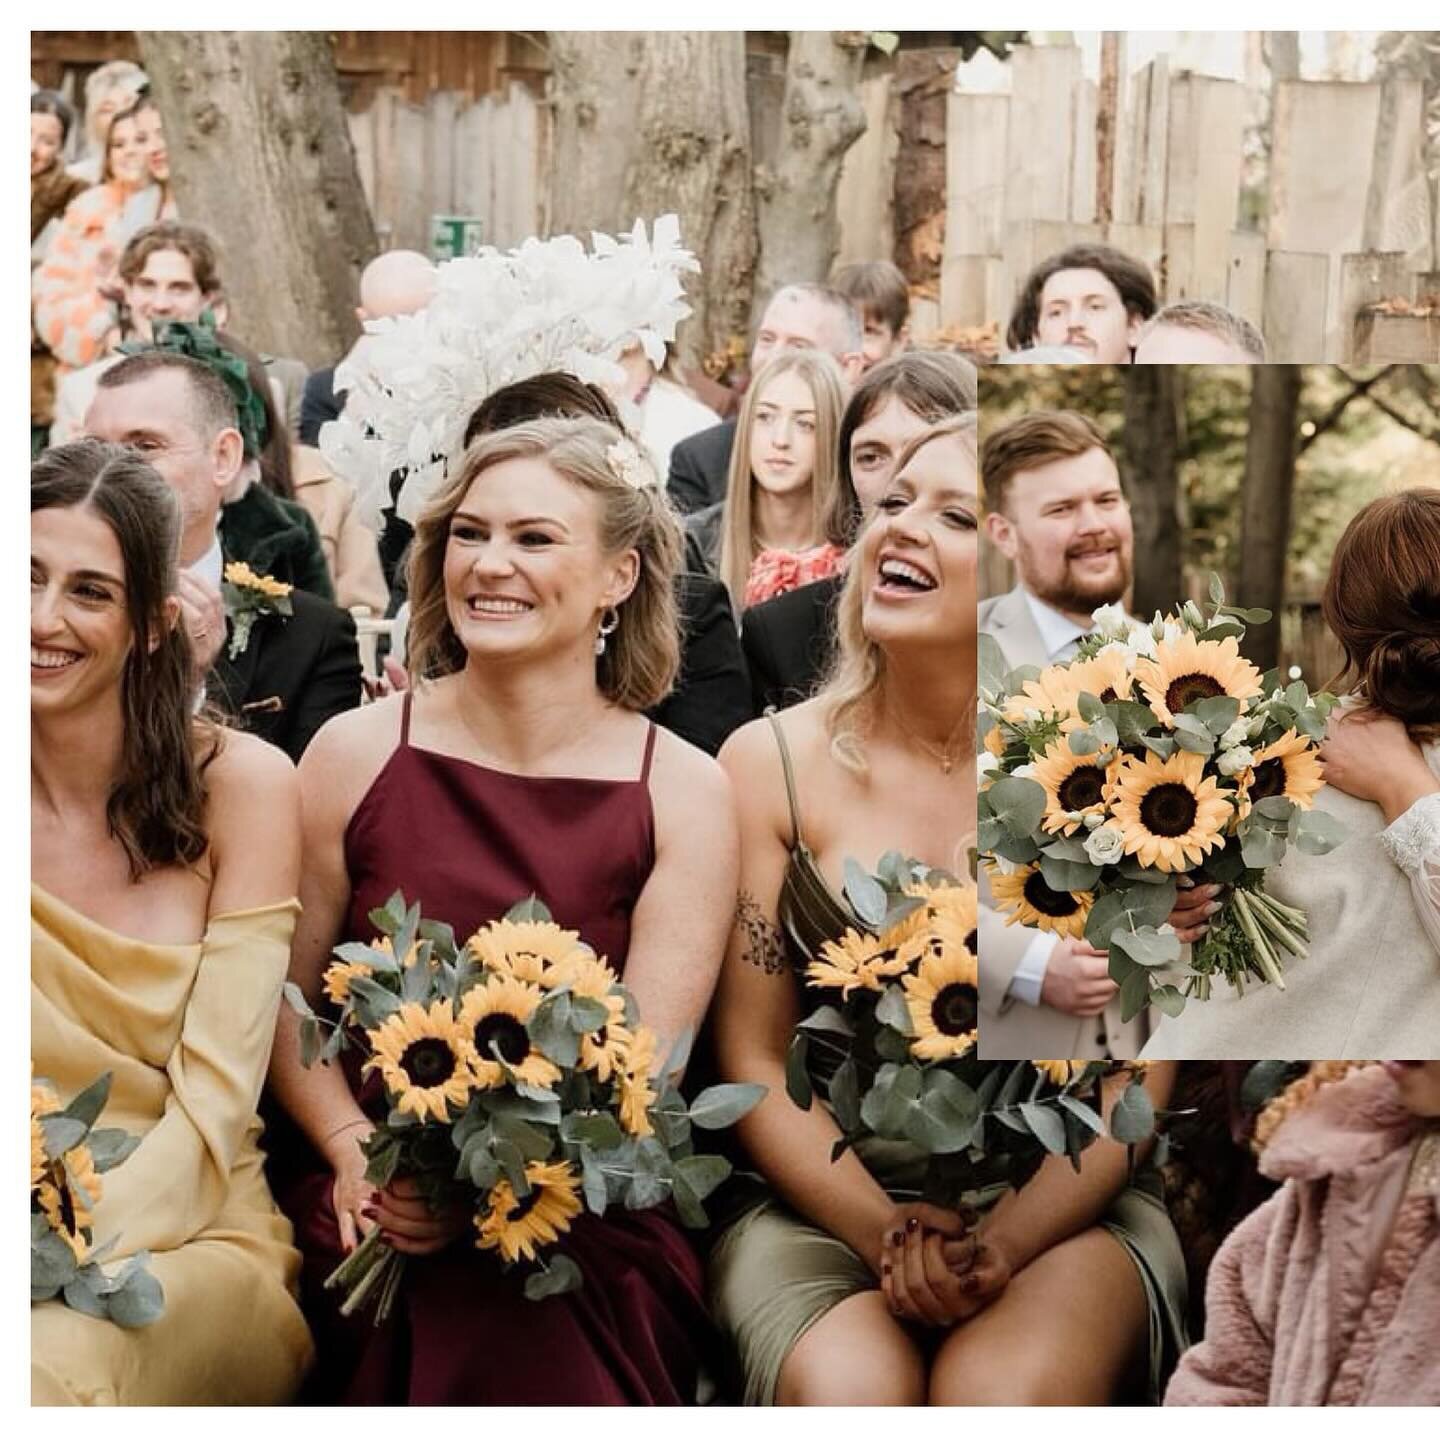 🌻Bridie and Liam🌻
.
Taking it back to last November for Bridie and Liam who got married at @thetreehousealnwick . Filled with sunflowers, eucalyptus and touches of anemones, lizzy and gyp. Bridie and Liam were lush to chat with from start to finish